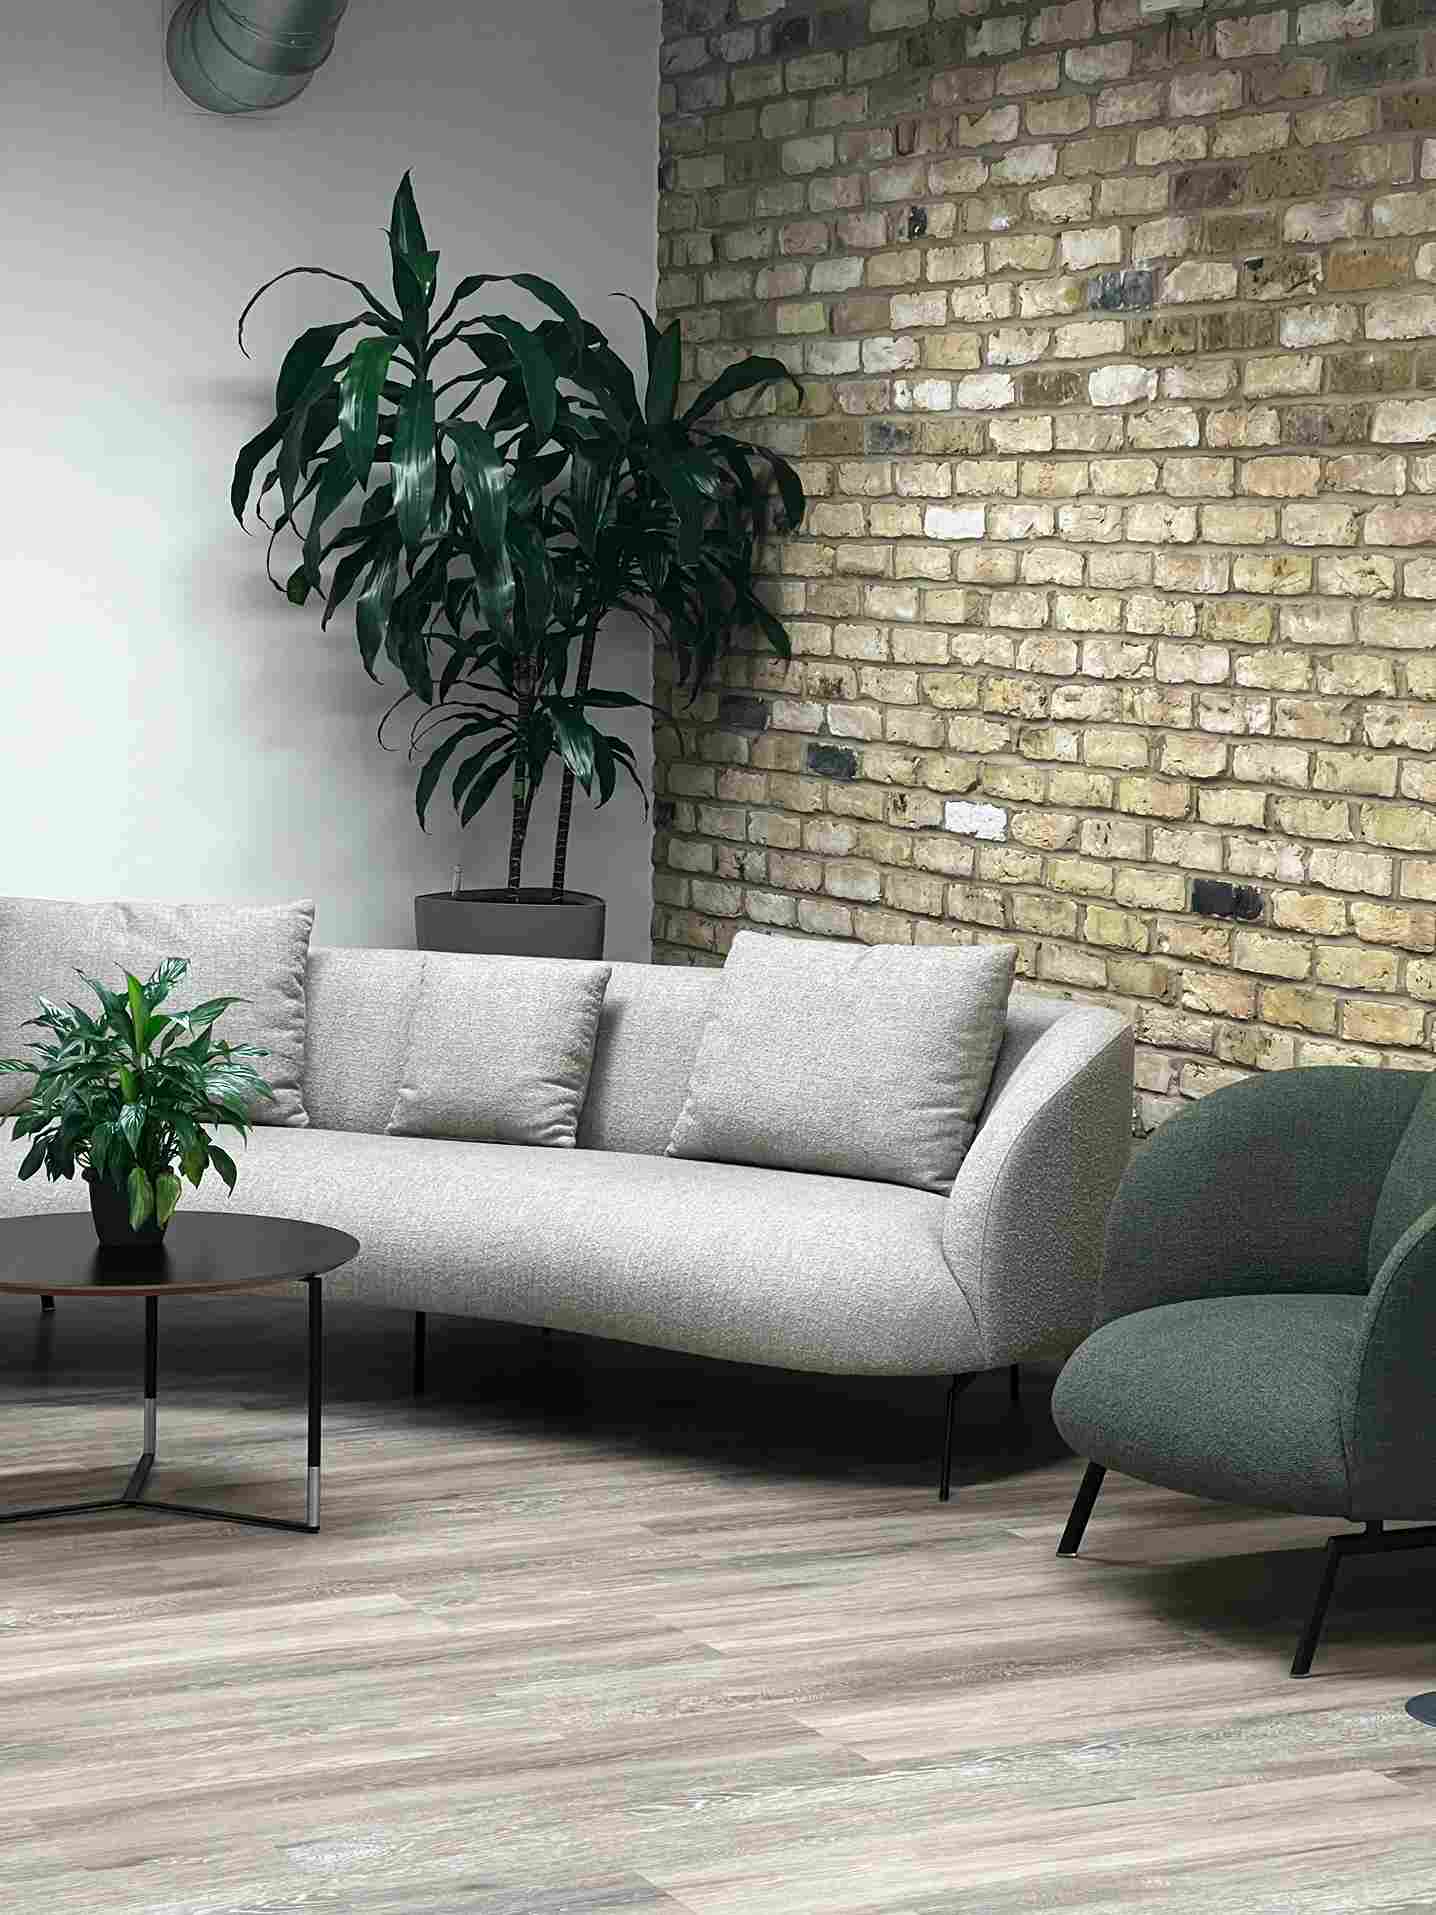 grey and dark green sofas surrounded by standing plants in Zühlke London office in Shoreditch